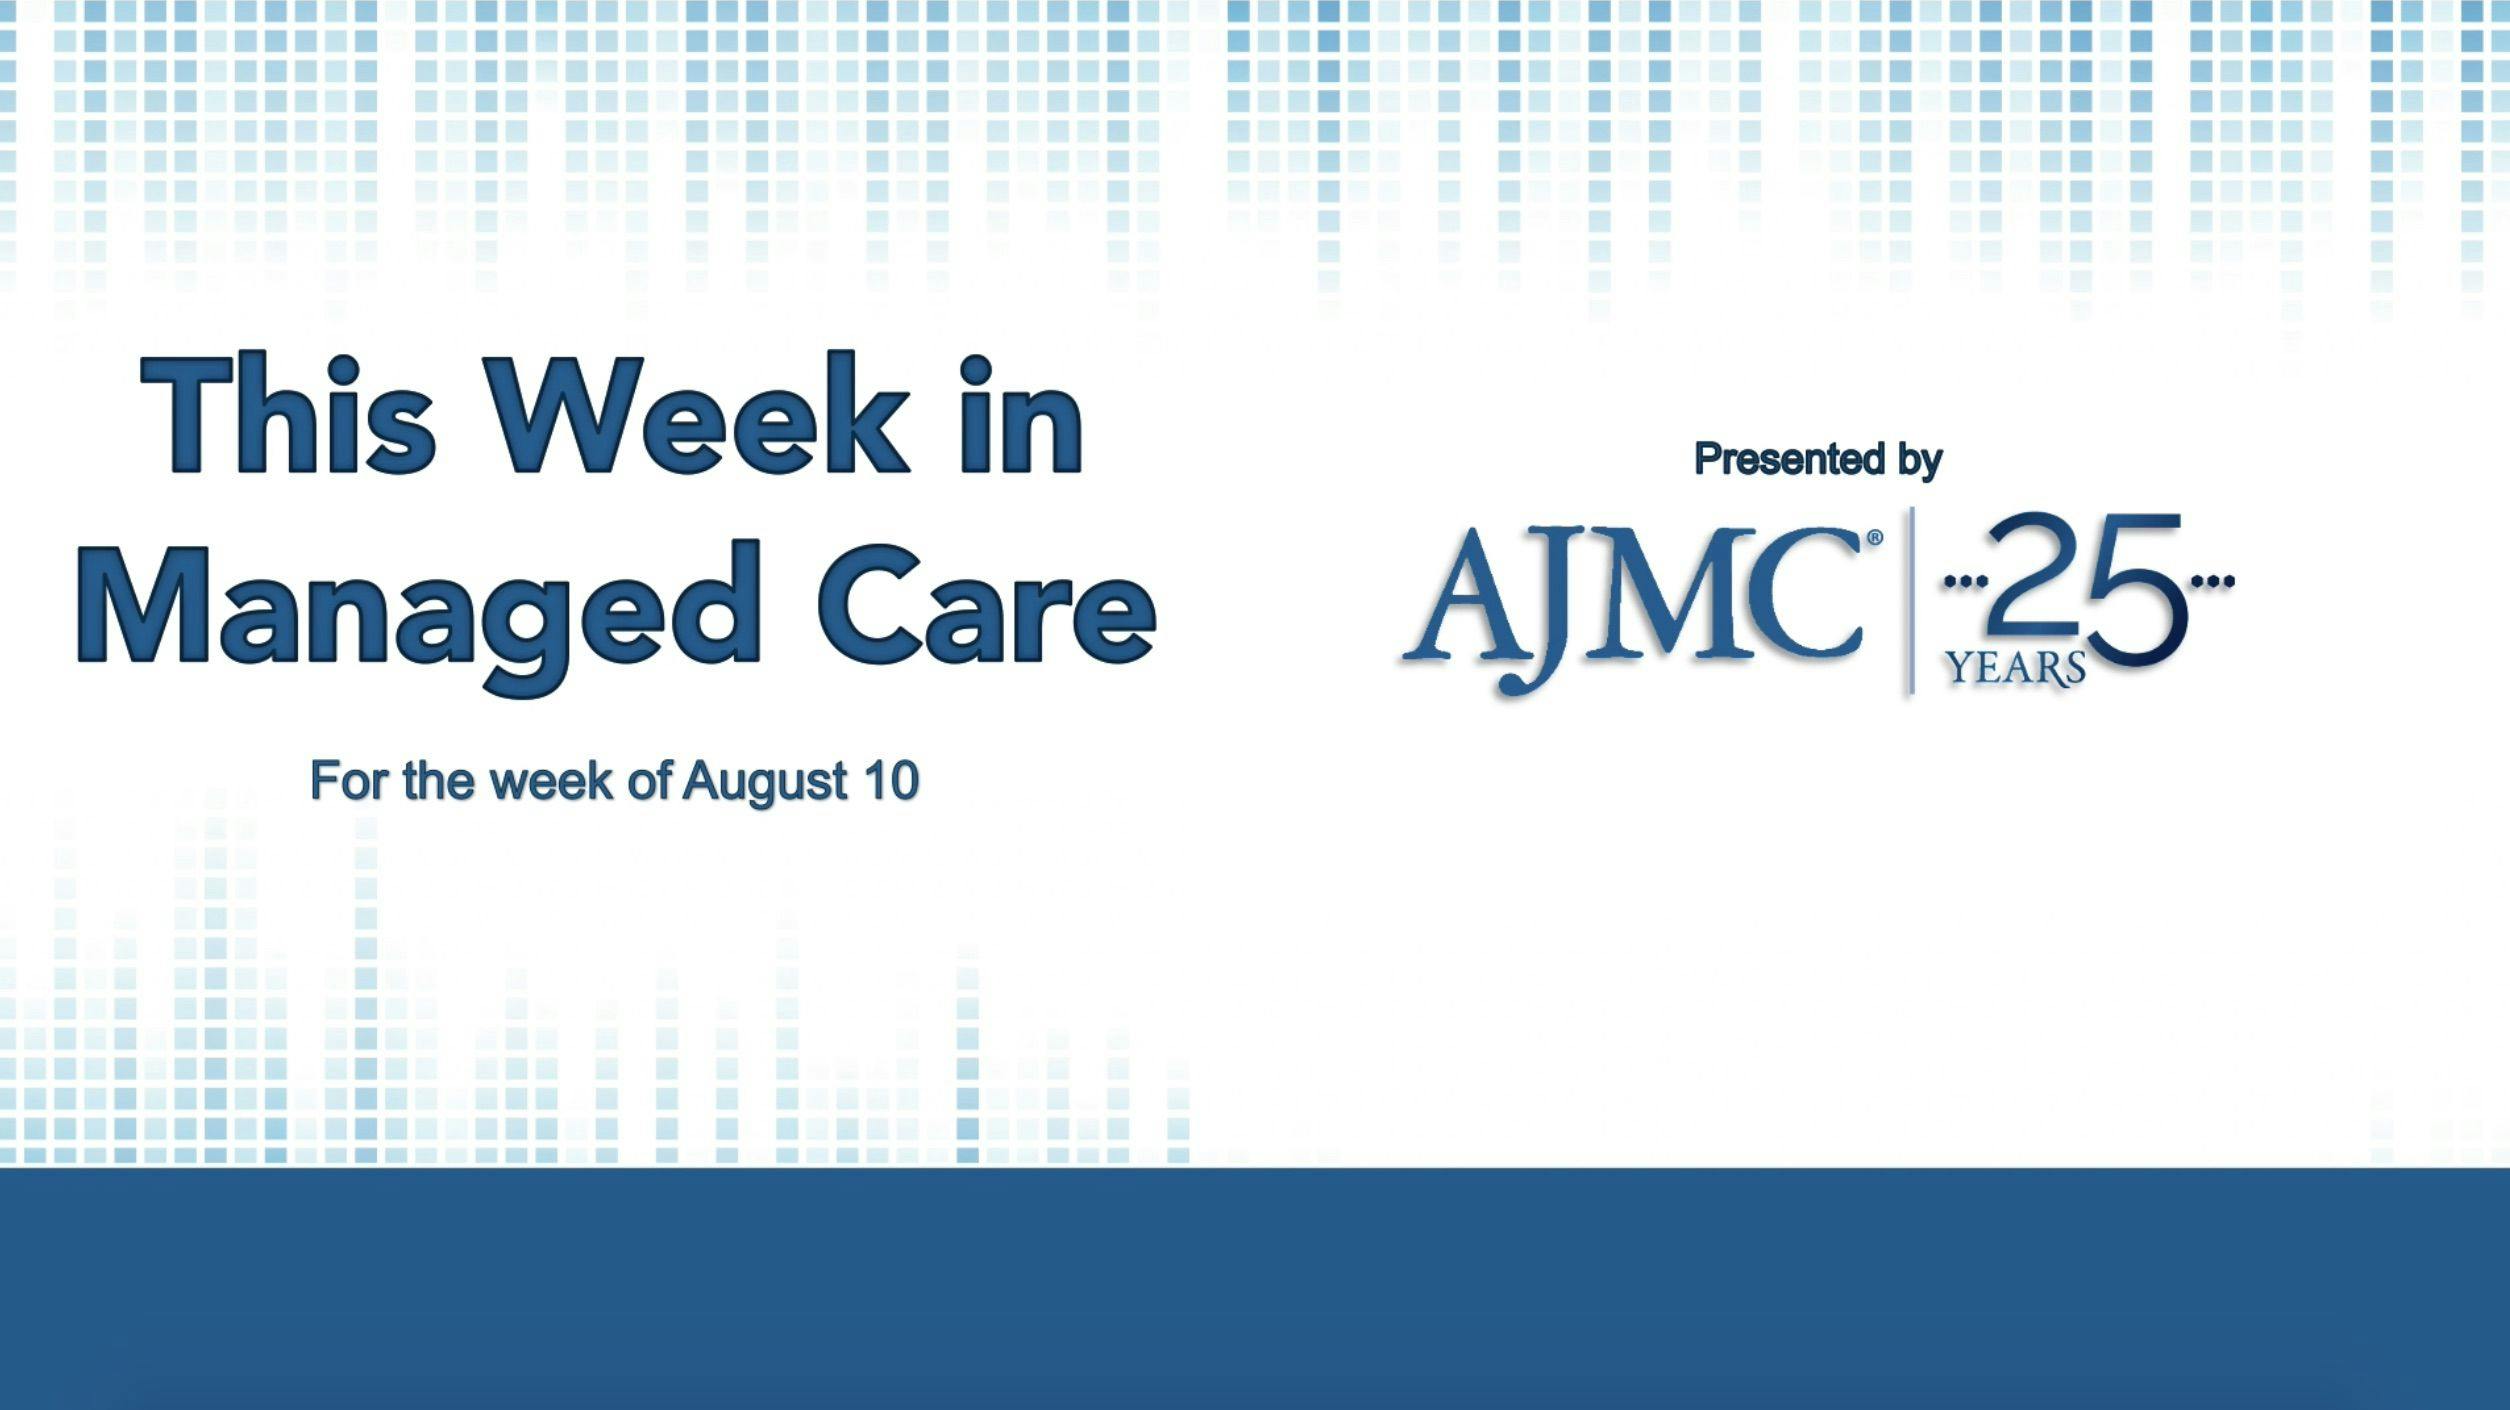 This Week in Managed Care: August 14, 2020